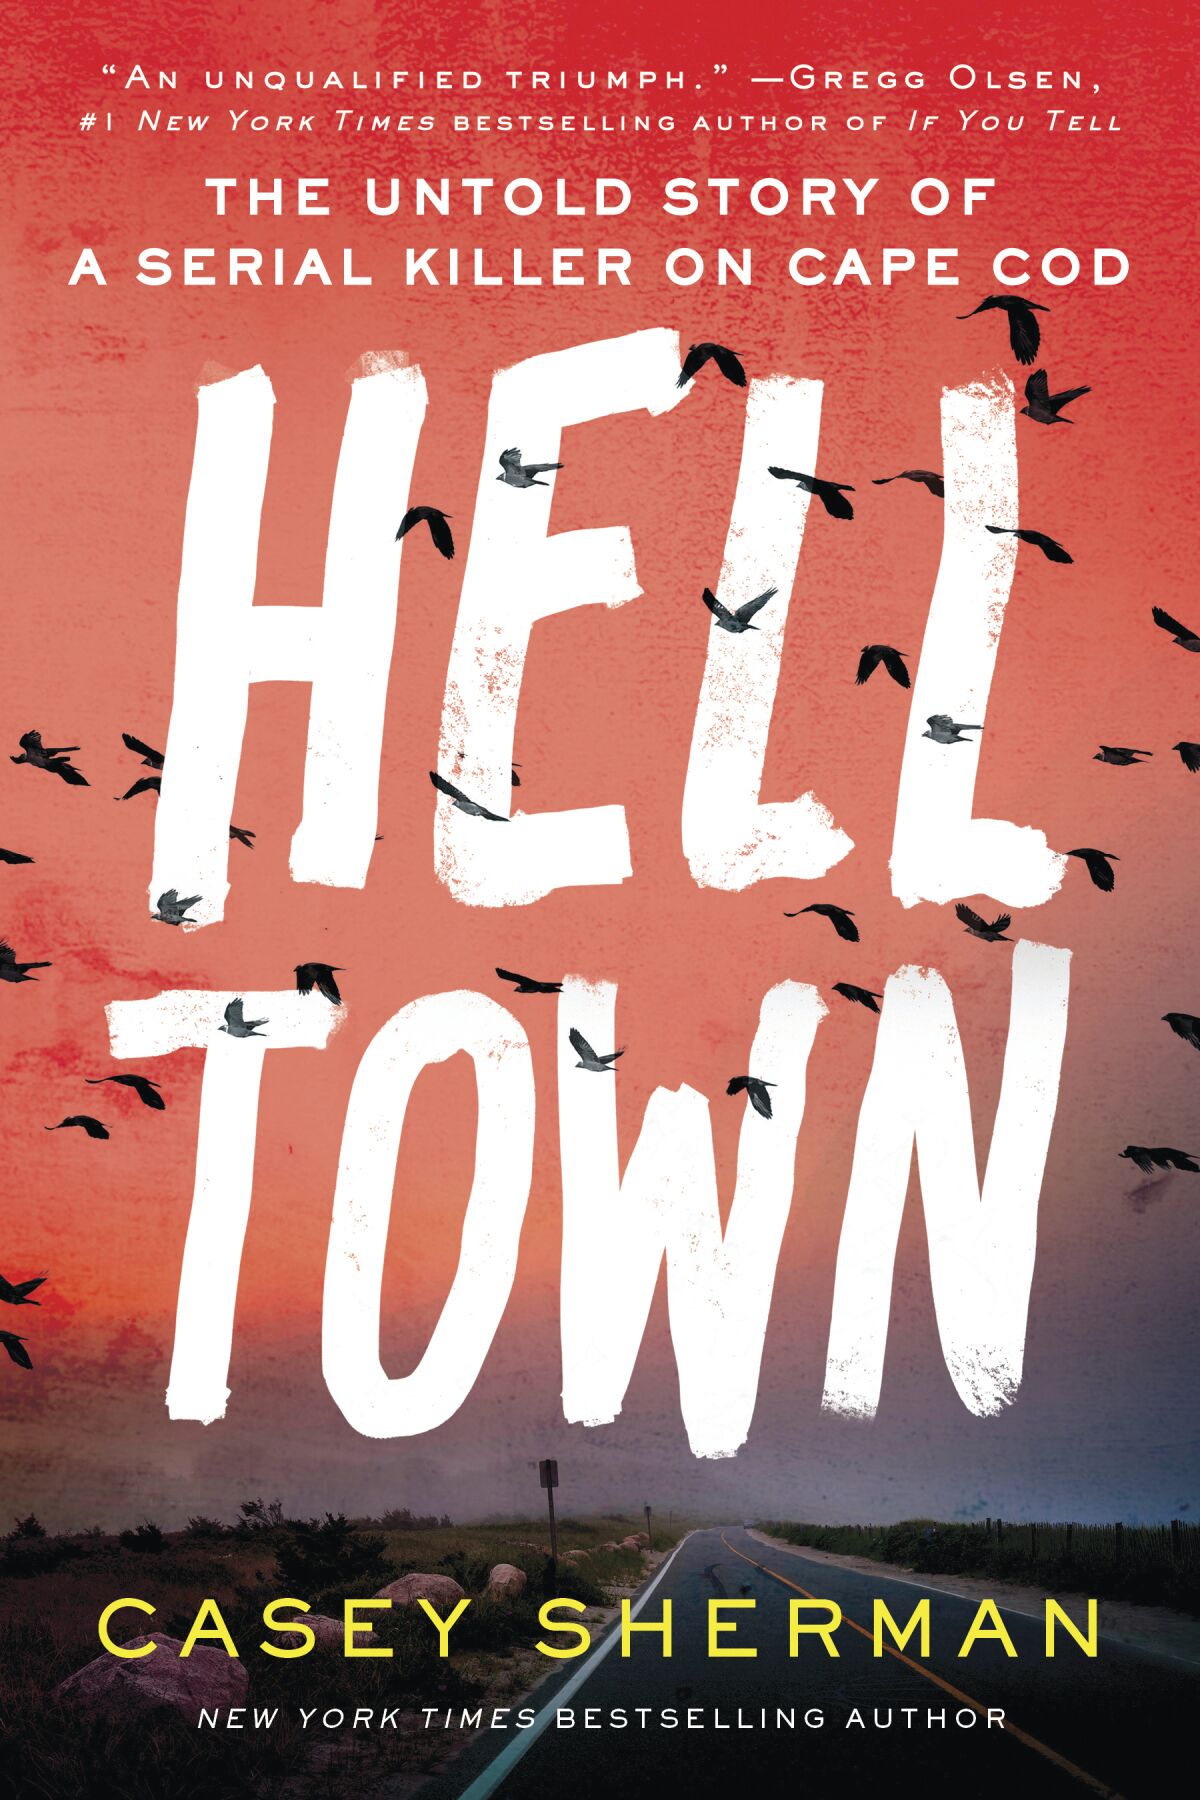 This image released by Sourcebooks shows cover art for "Hell Town: The Untold Story of a Serial Killer on Cape Cod" by Casey Sherman. (Sourcebooks via AP)